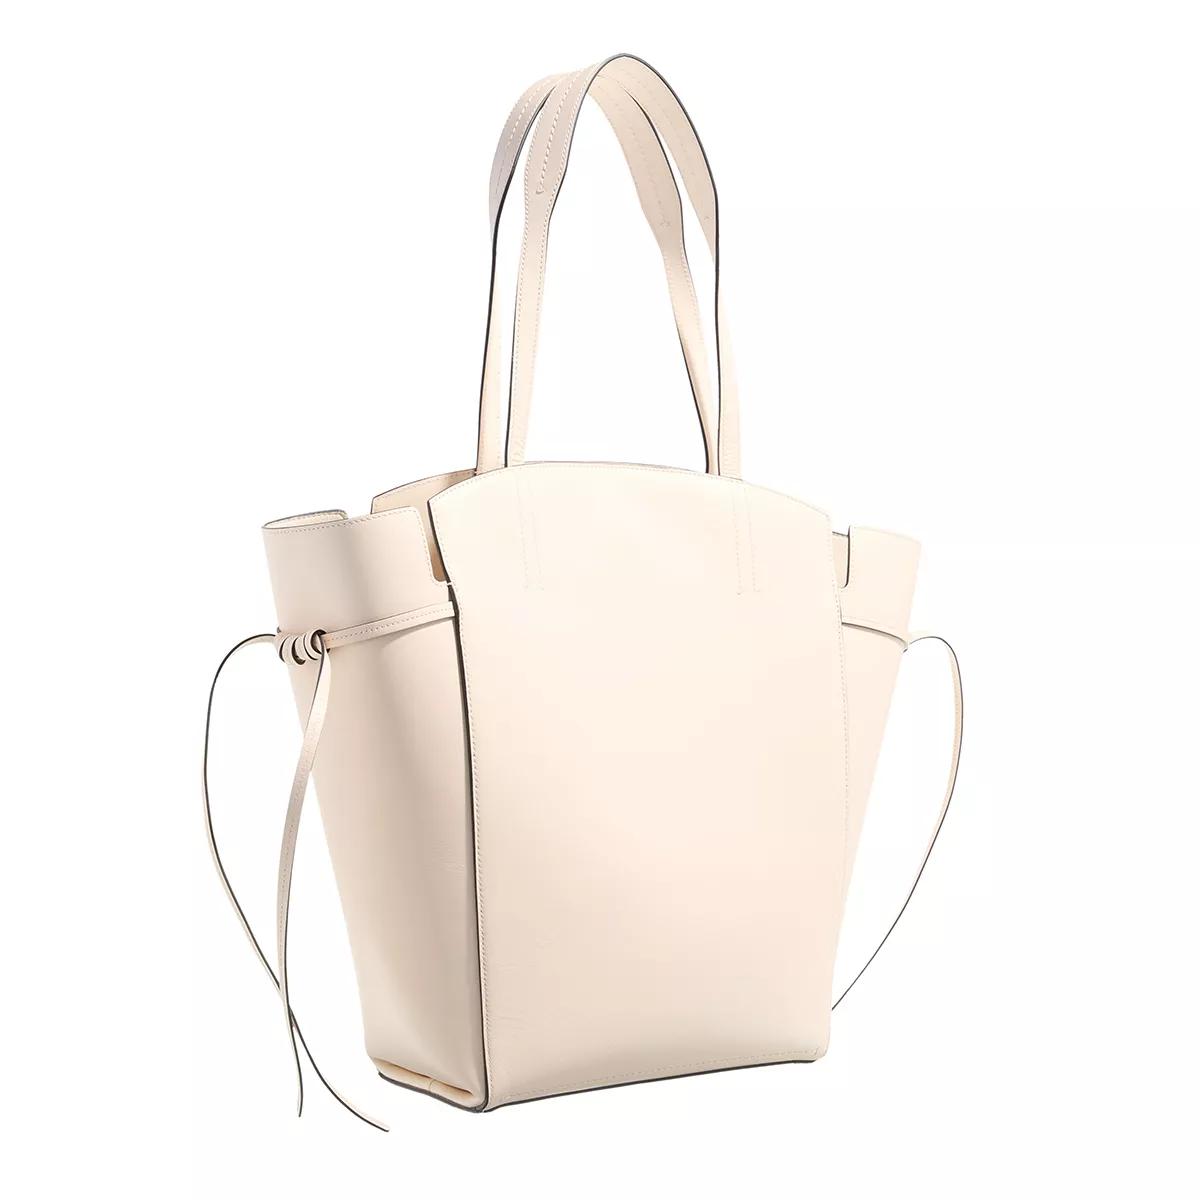 Mulberry Shoppers Clovelly Tote Bag in crème